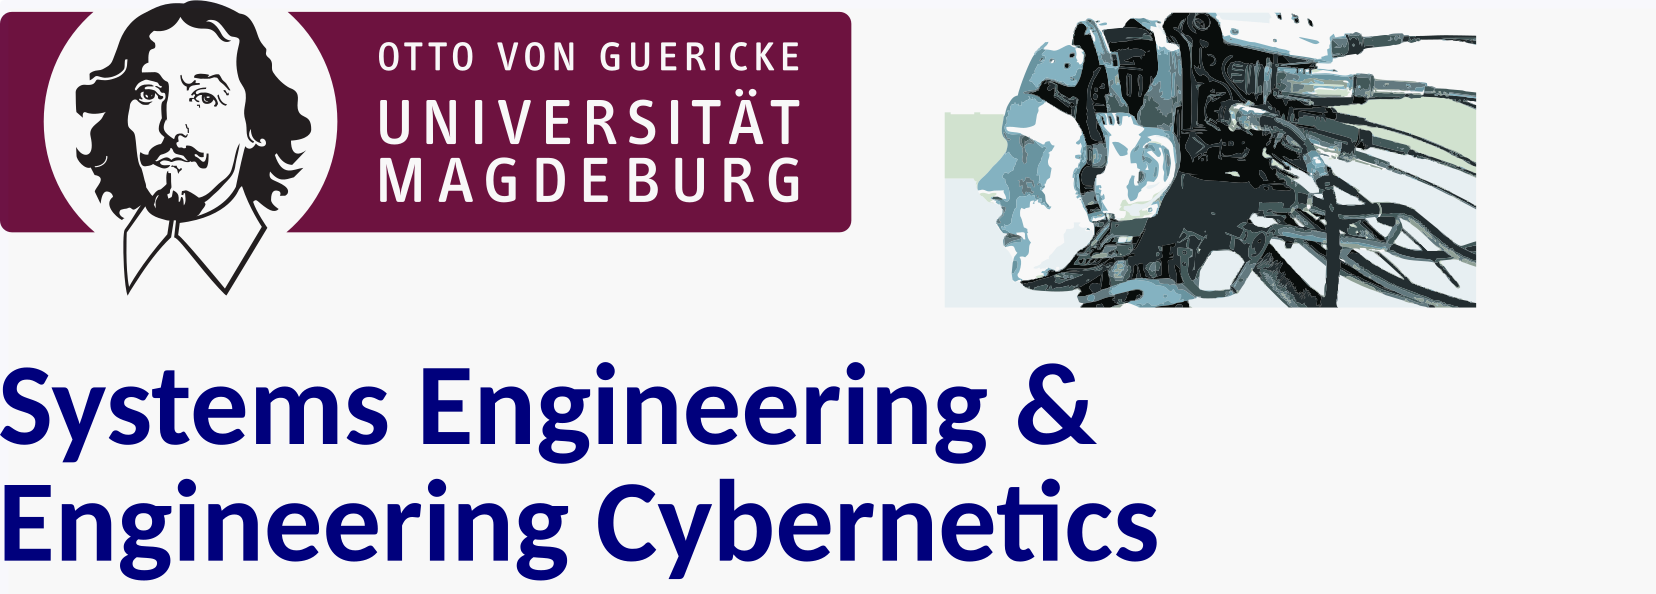 Systems Engineering & Engineering Cybernetics  - GRIAT double degree